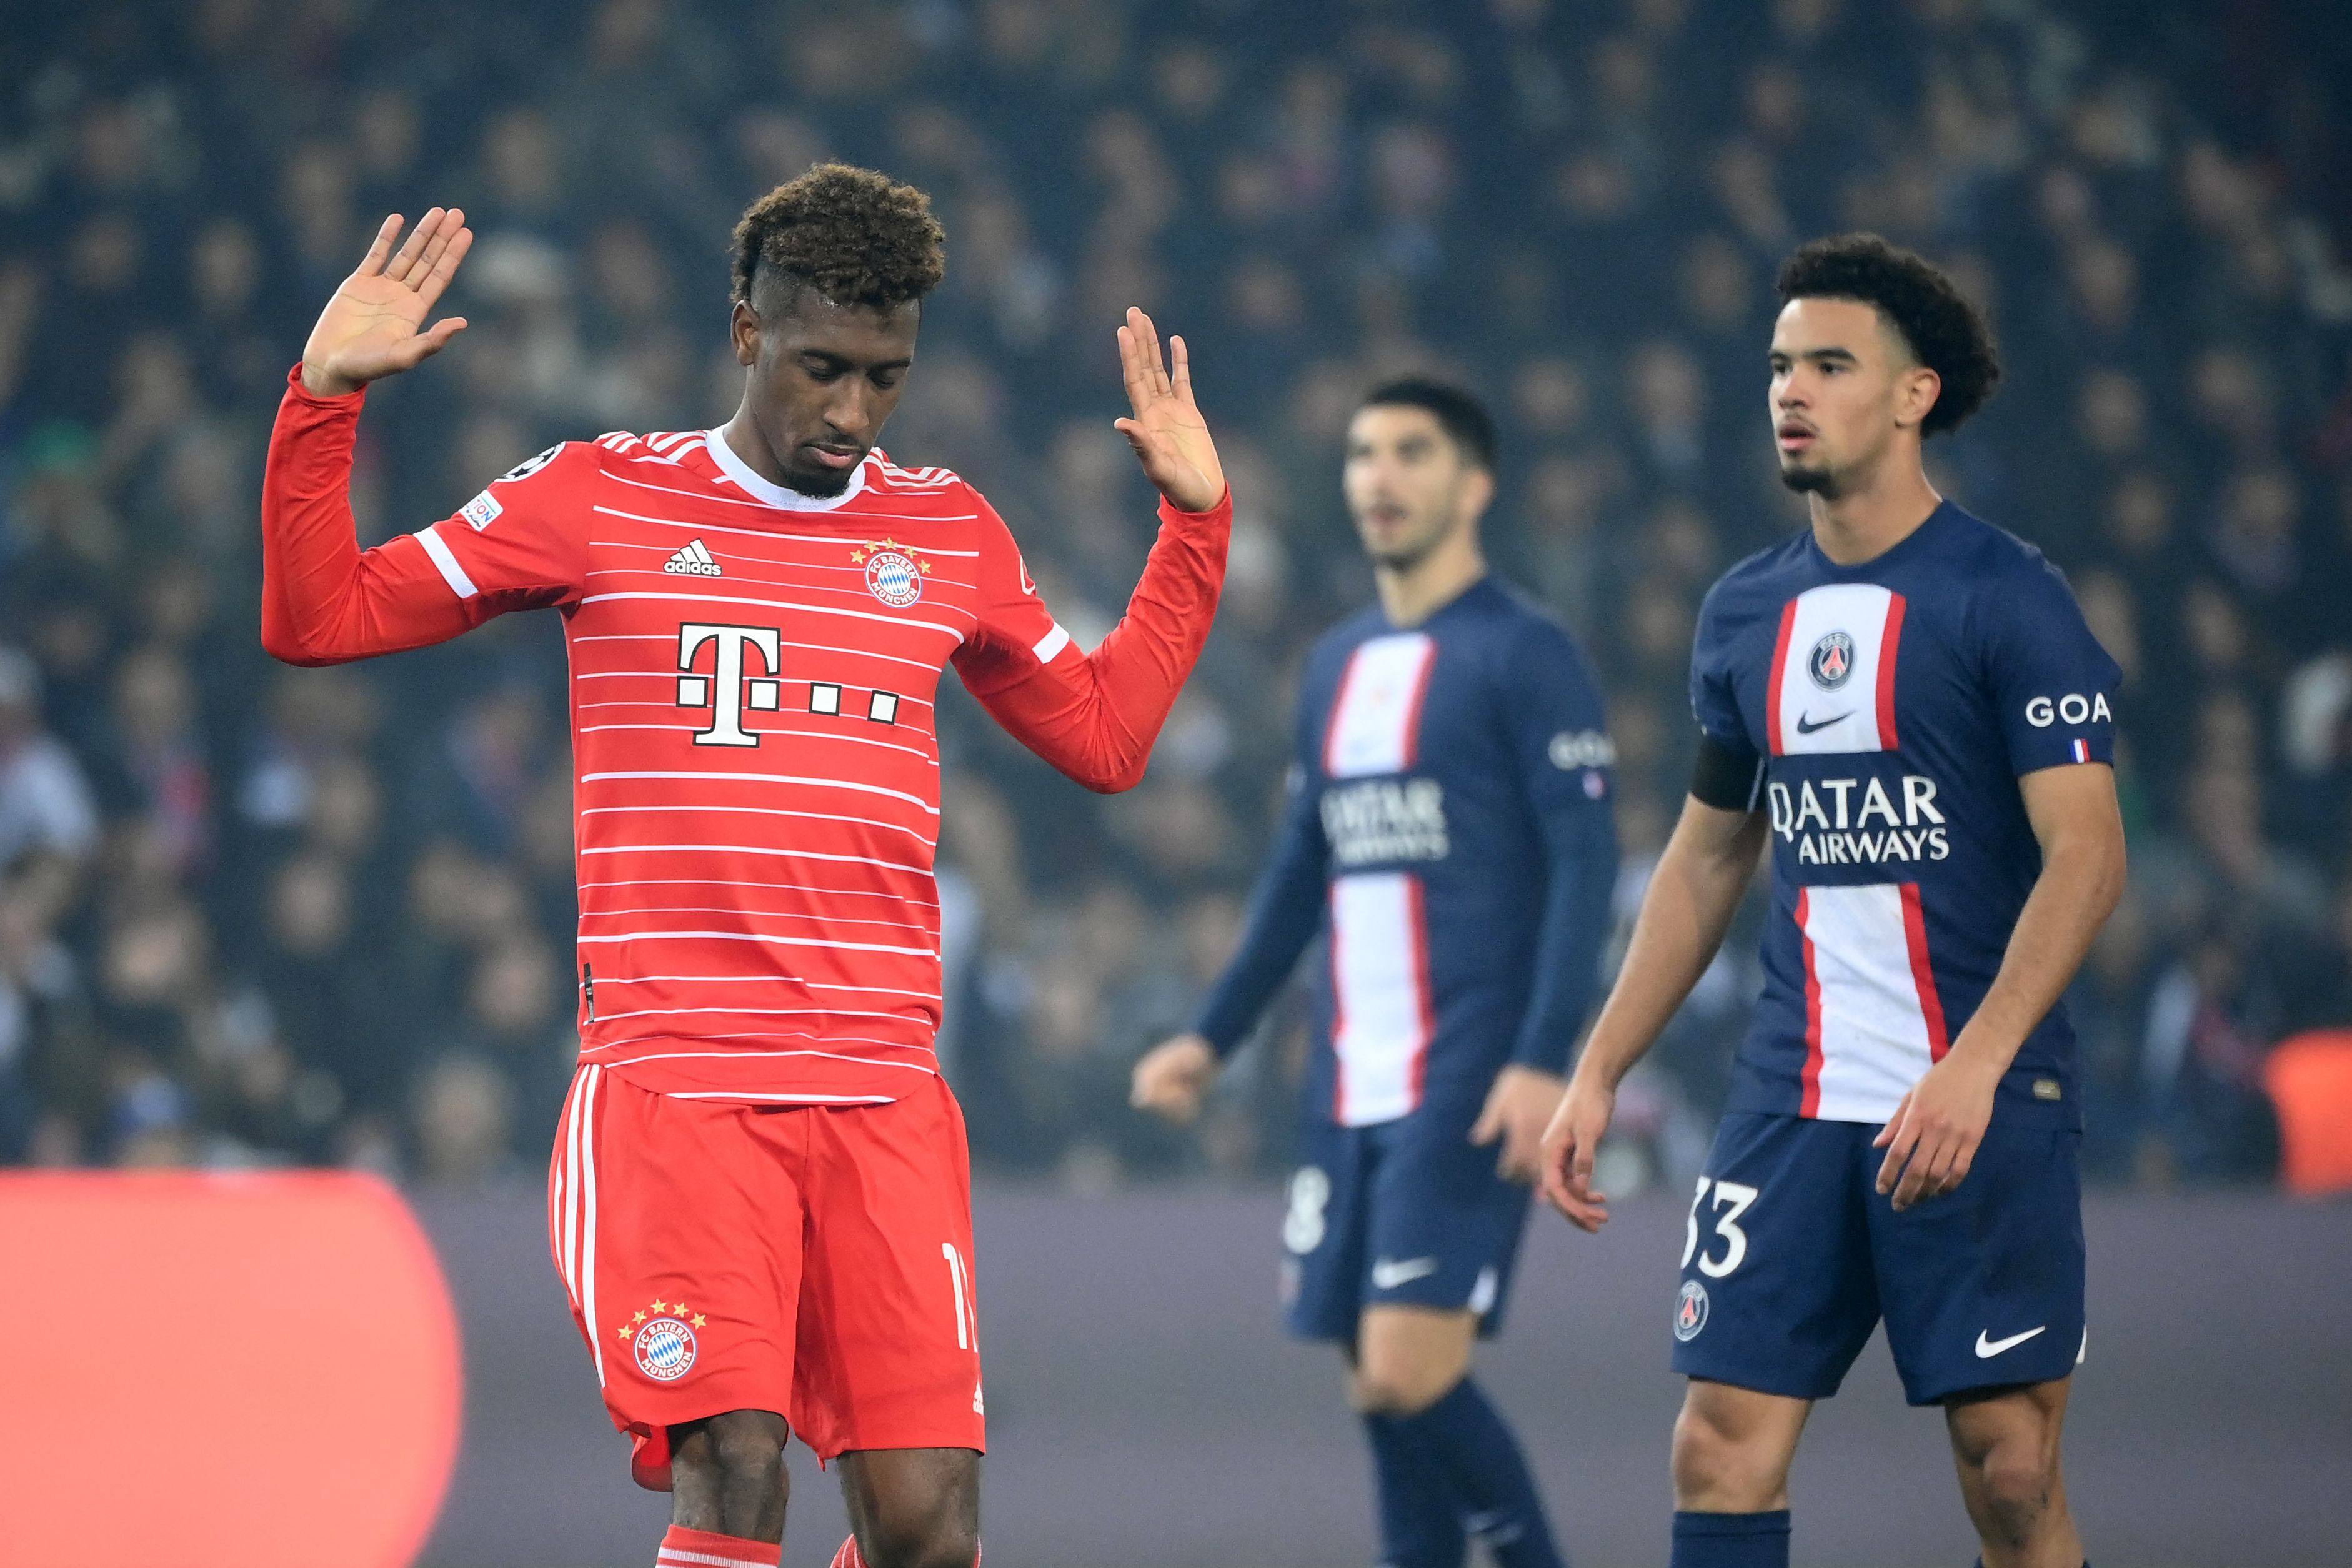 Bayern Munich’s French forward Kingsley Coman refuses to celebrate after scoring against Paris Saint-Germain during the first leg of the Uefa Champions League round of 16 first leg at the Parc des Princes. Photo: AFP